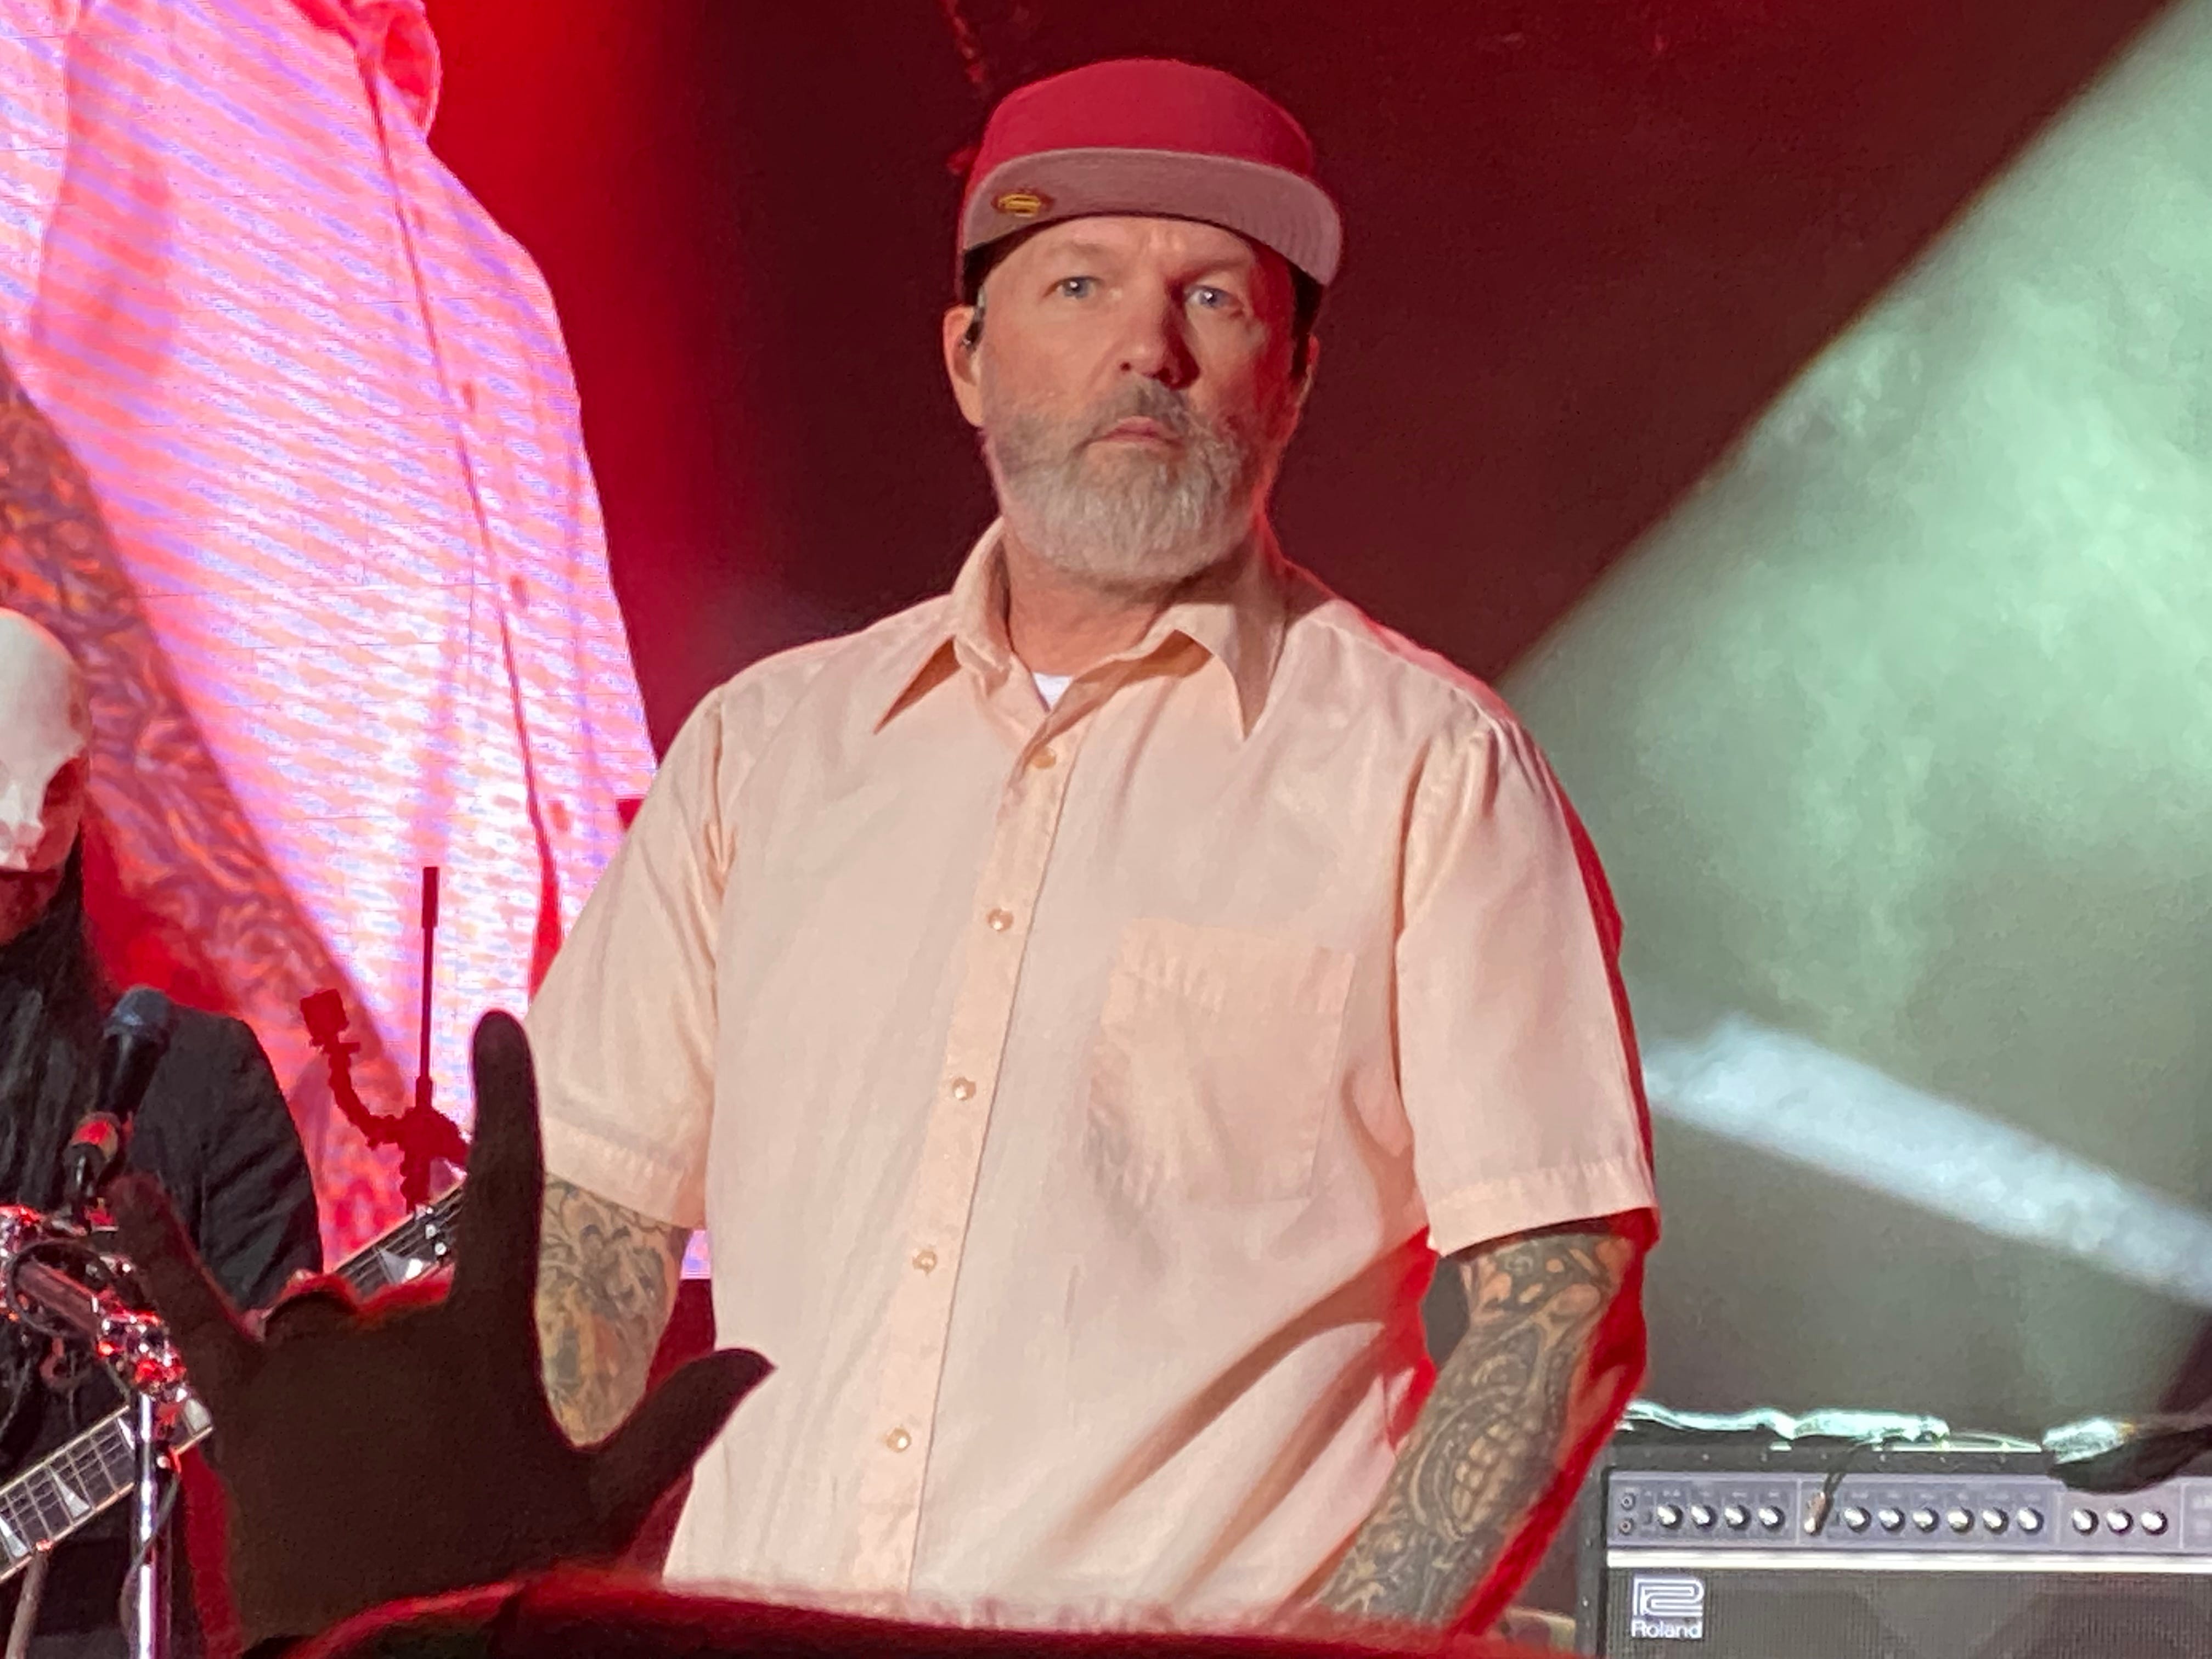 A picture of an elderly gentleman in a red hat. The man's name is Fred Durst